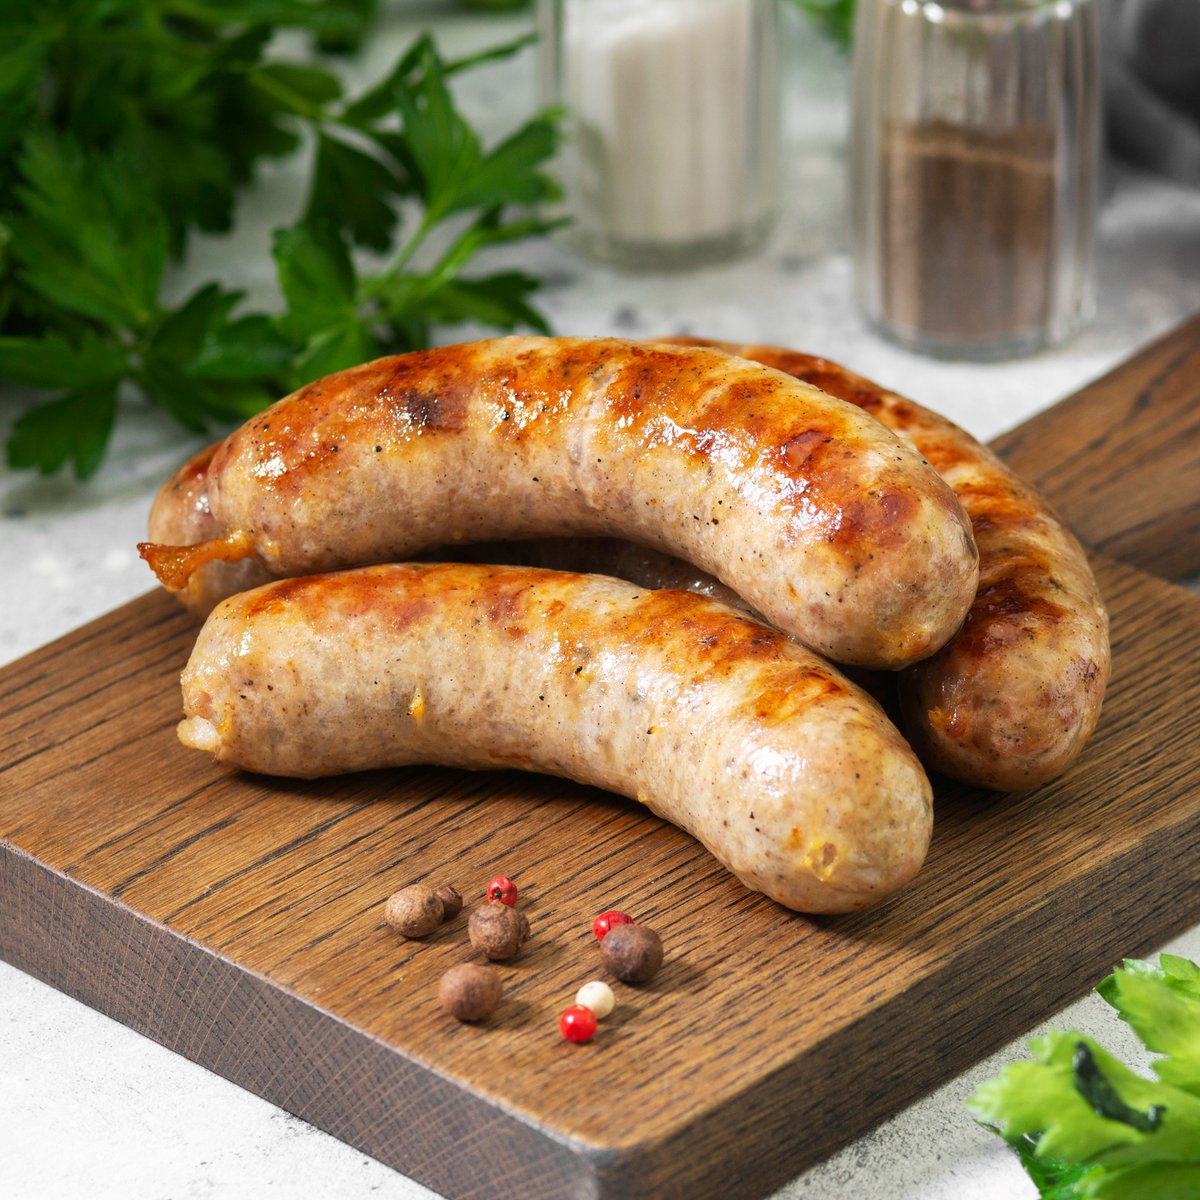 Salm Partners. Simply delicious. Extraordinarily efficient. Surprisingly cost-effective. Exceptionally Safe. Learn more about our unique 'mass-craft' method of producing high-quality, extended shelf-life #sausage and #hotdogs at salmfoodservice.com